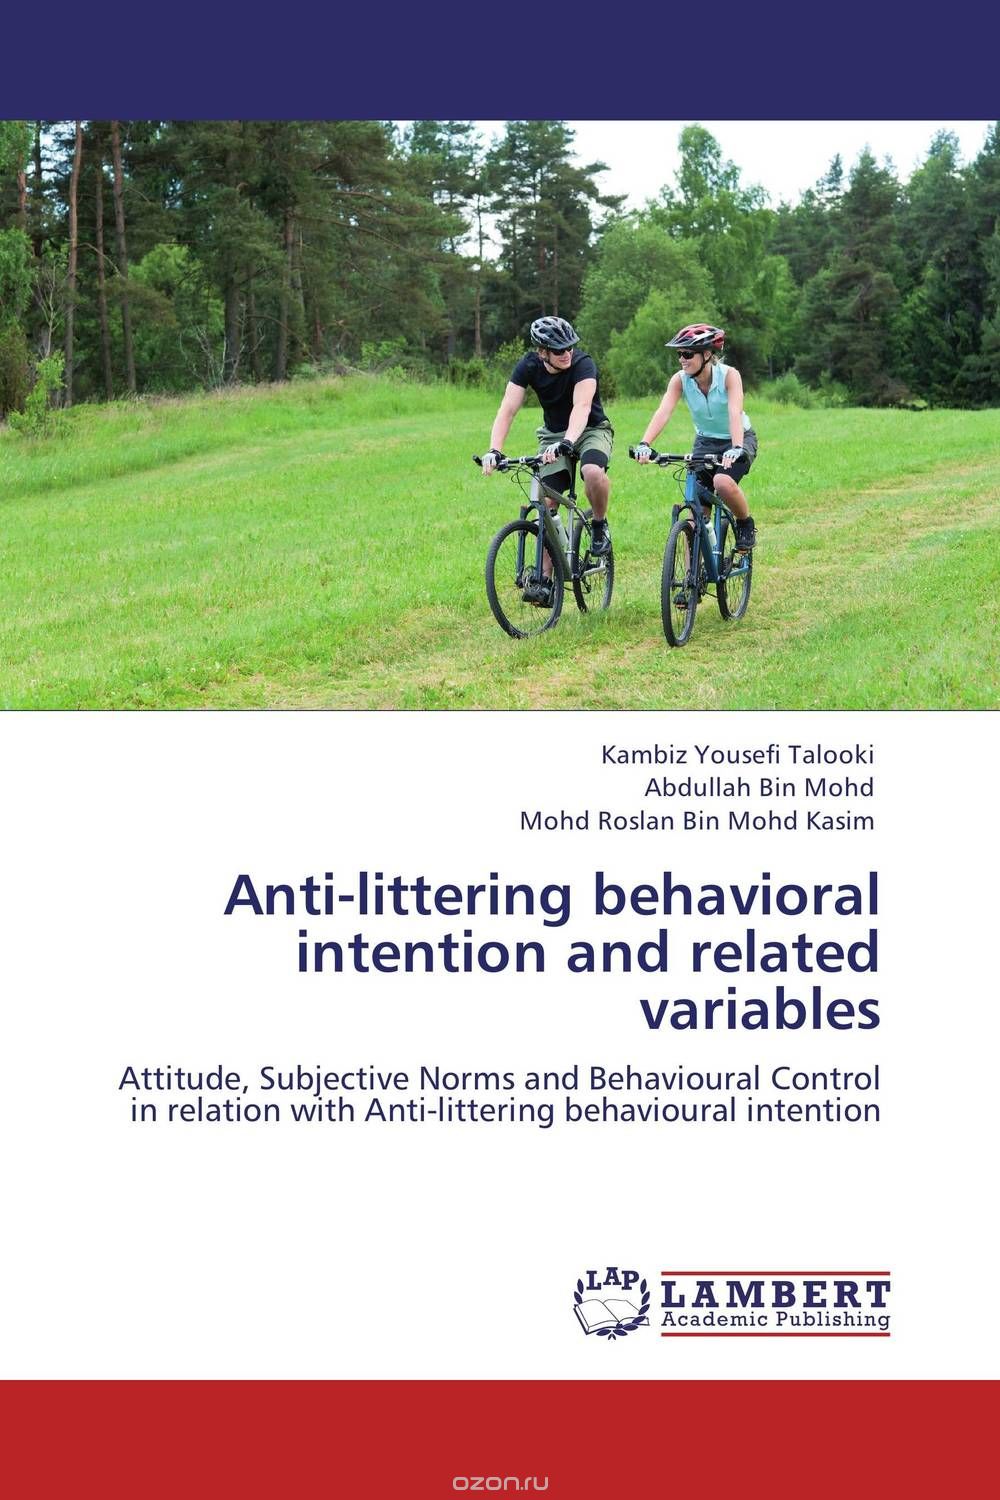 Anti-littering behavioral intention and related variables